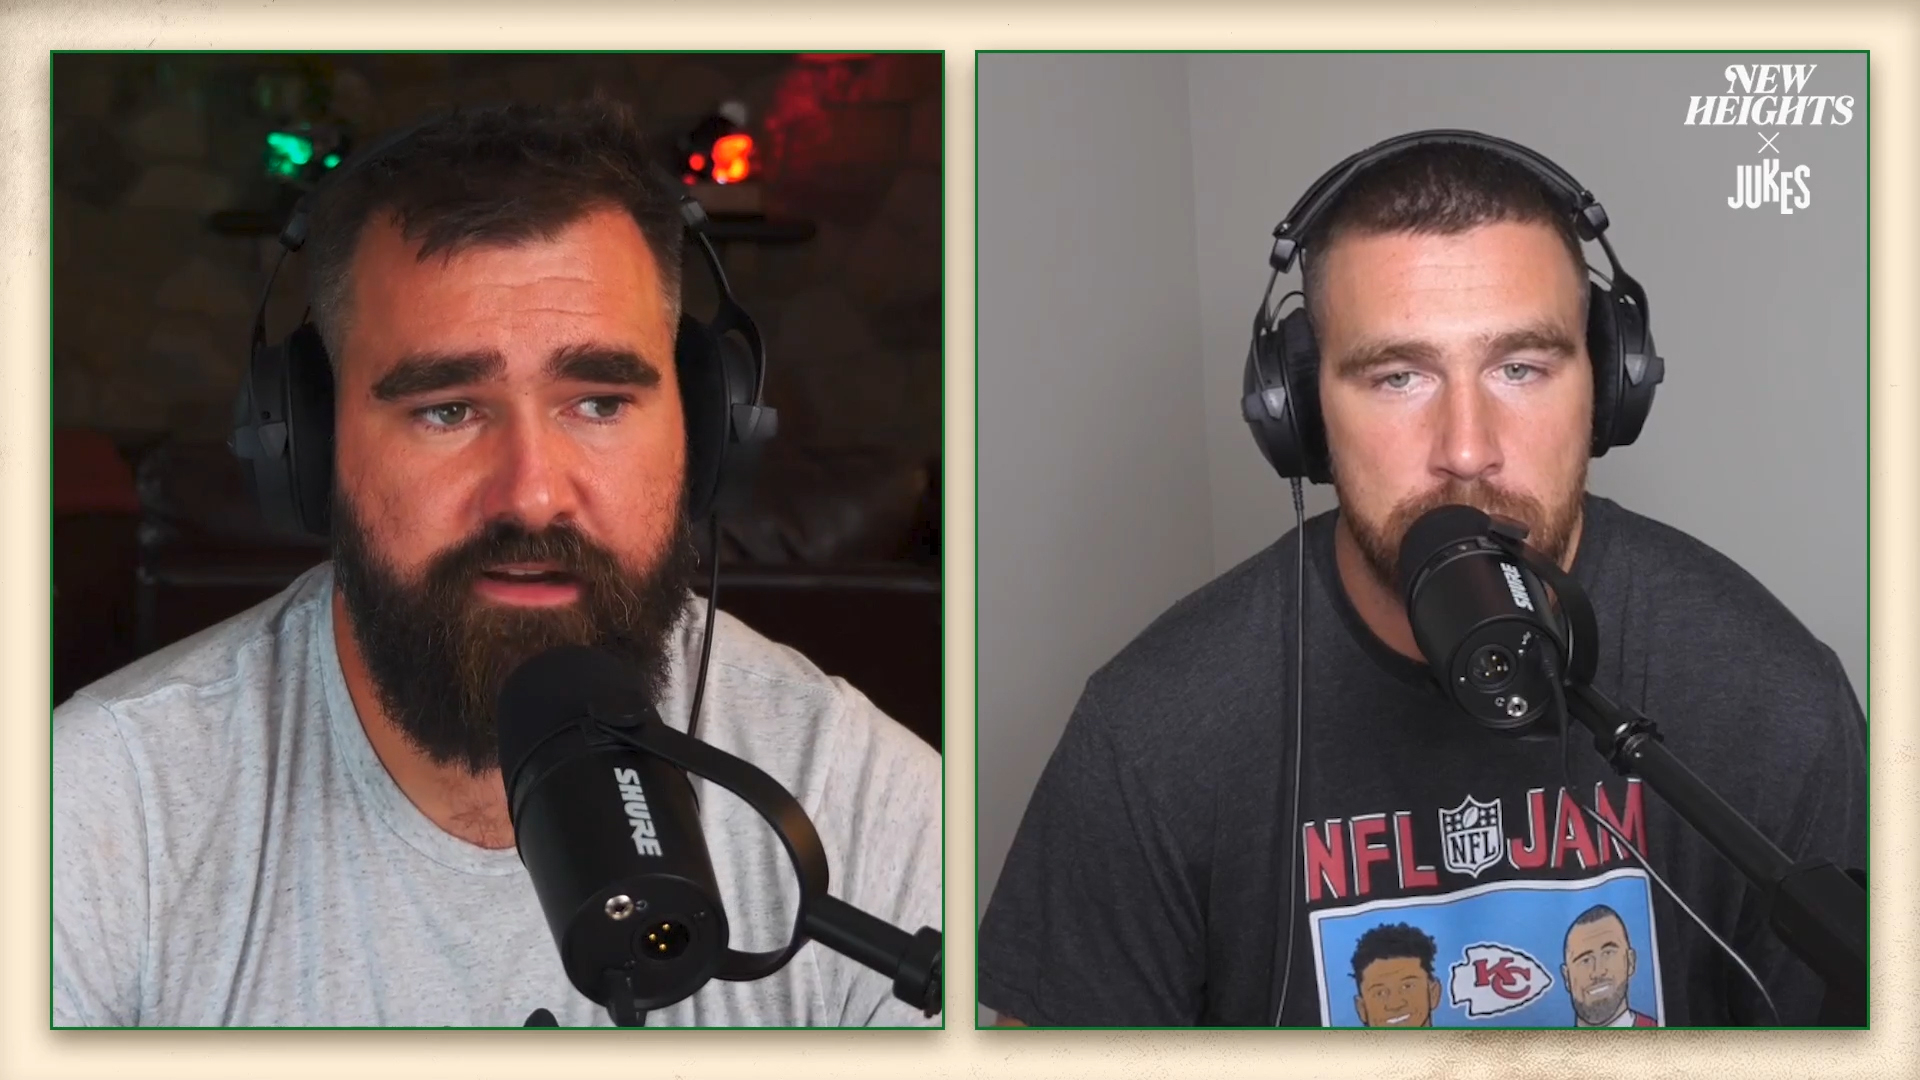 In this clip from the JUKES original "New Heights with Jason & Travis Kelce," Jason Kelce talks about looking forward to playing against former Eagles QB Carson Wentz in Week 3 despite a “bad ending” in Philly, saying “I texted him today … he was a great friend, great teammate while in Philadelphia.” Episode 3 of "New Heights with Jason & Travis Kelce" is out now. Watch it on YouTube and listen to it on Apple, Spotify, and other major podcast platforms.